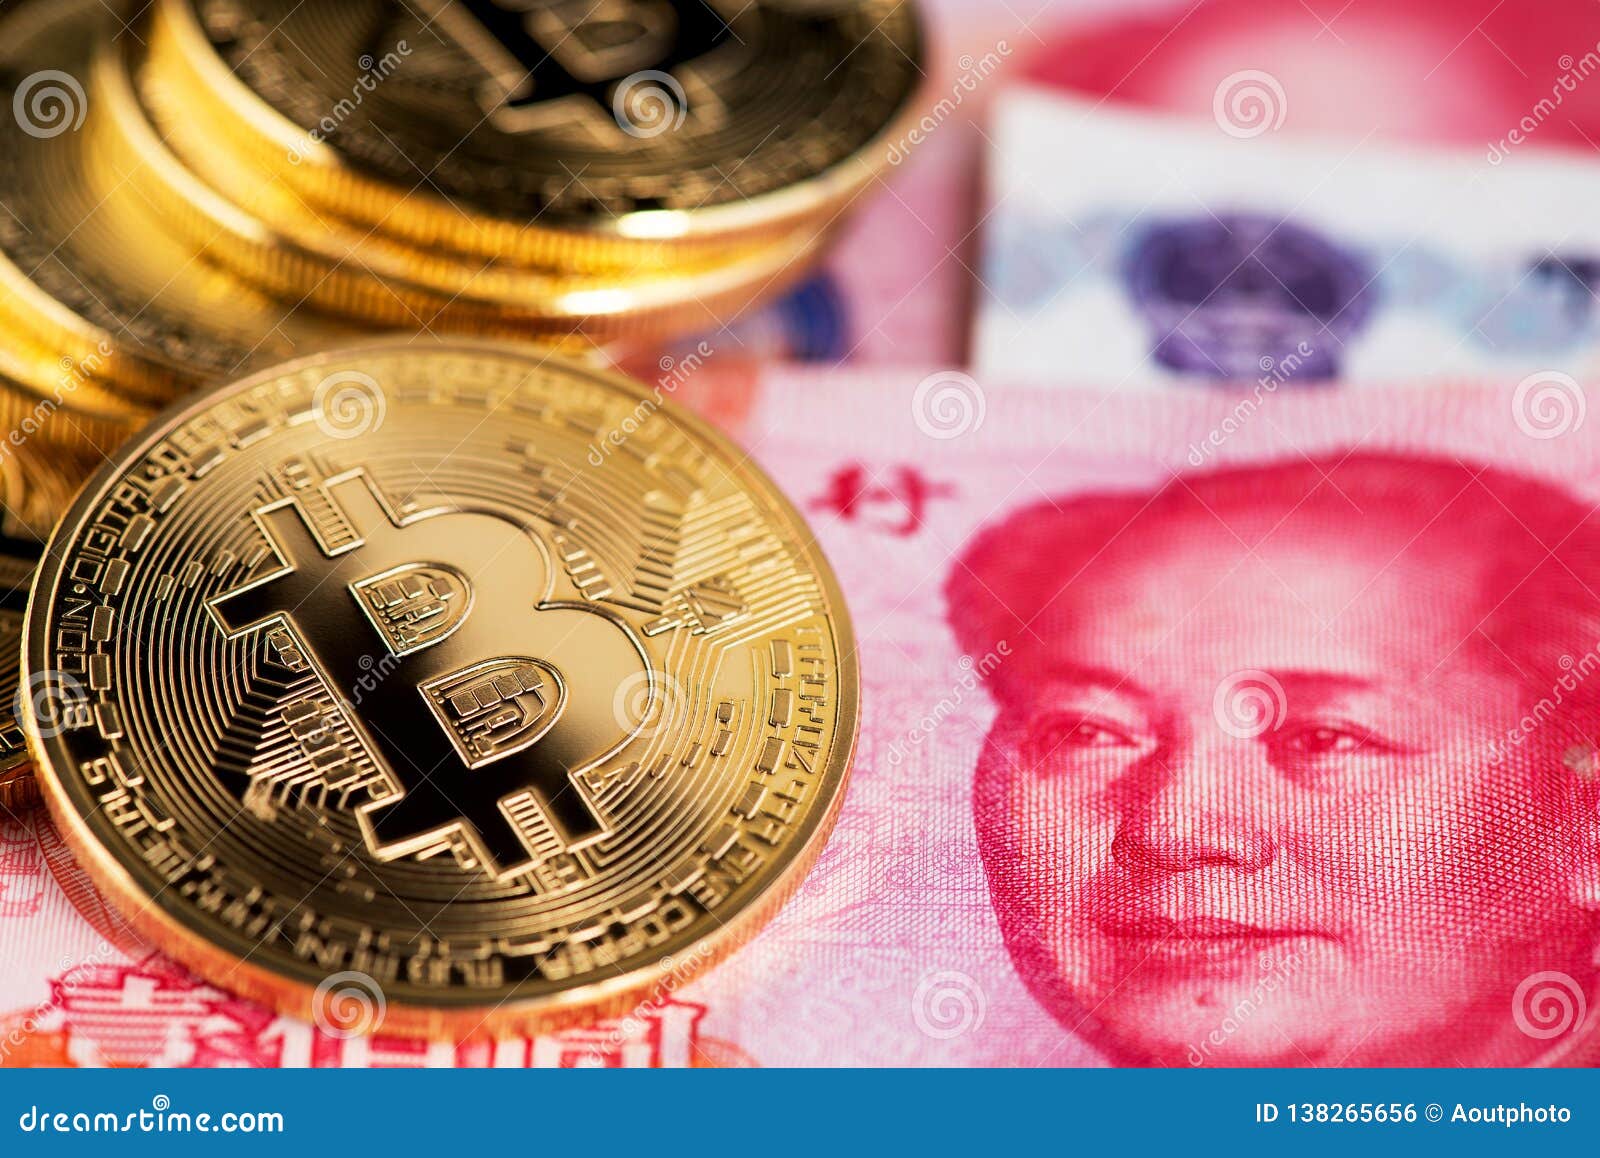 Bitcoin And Banknotes Of One Hundred Yuan. Background With ...